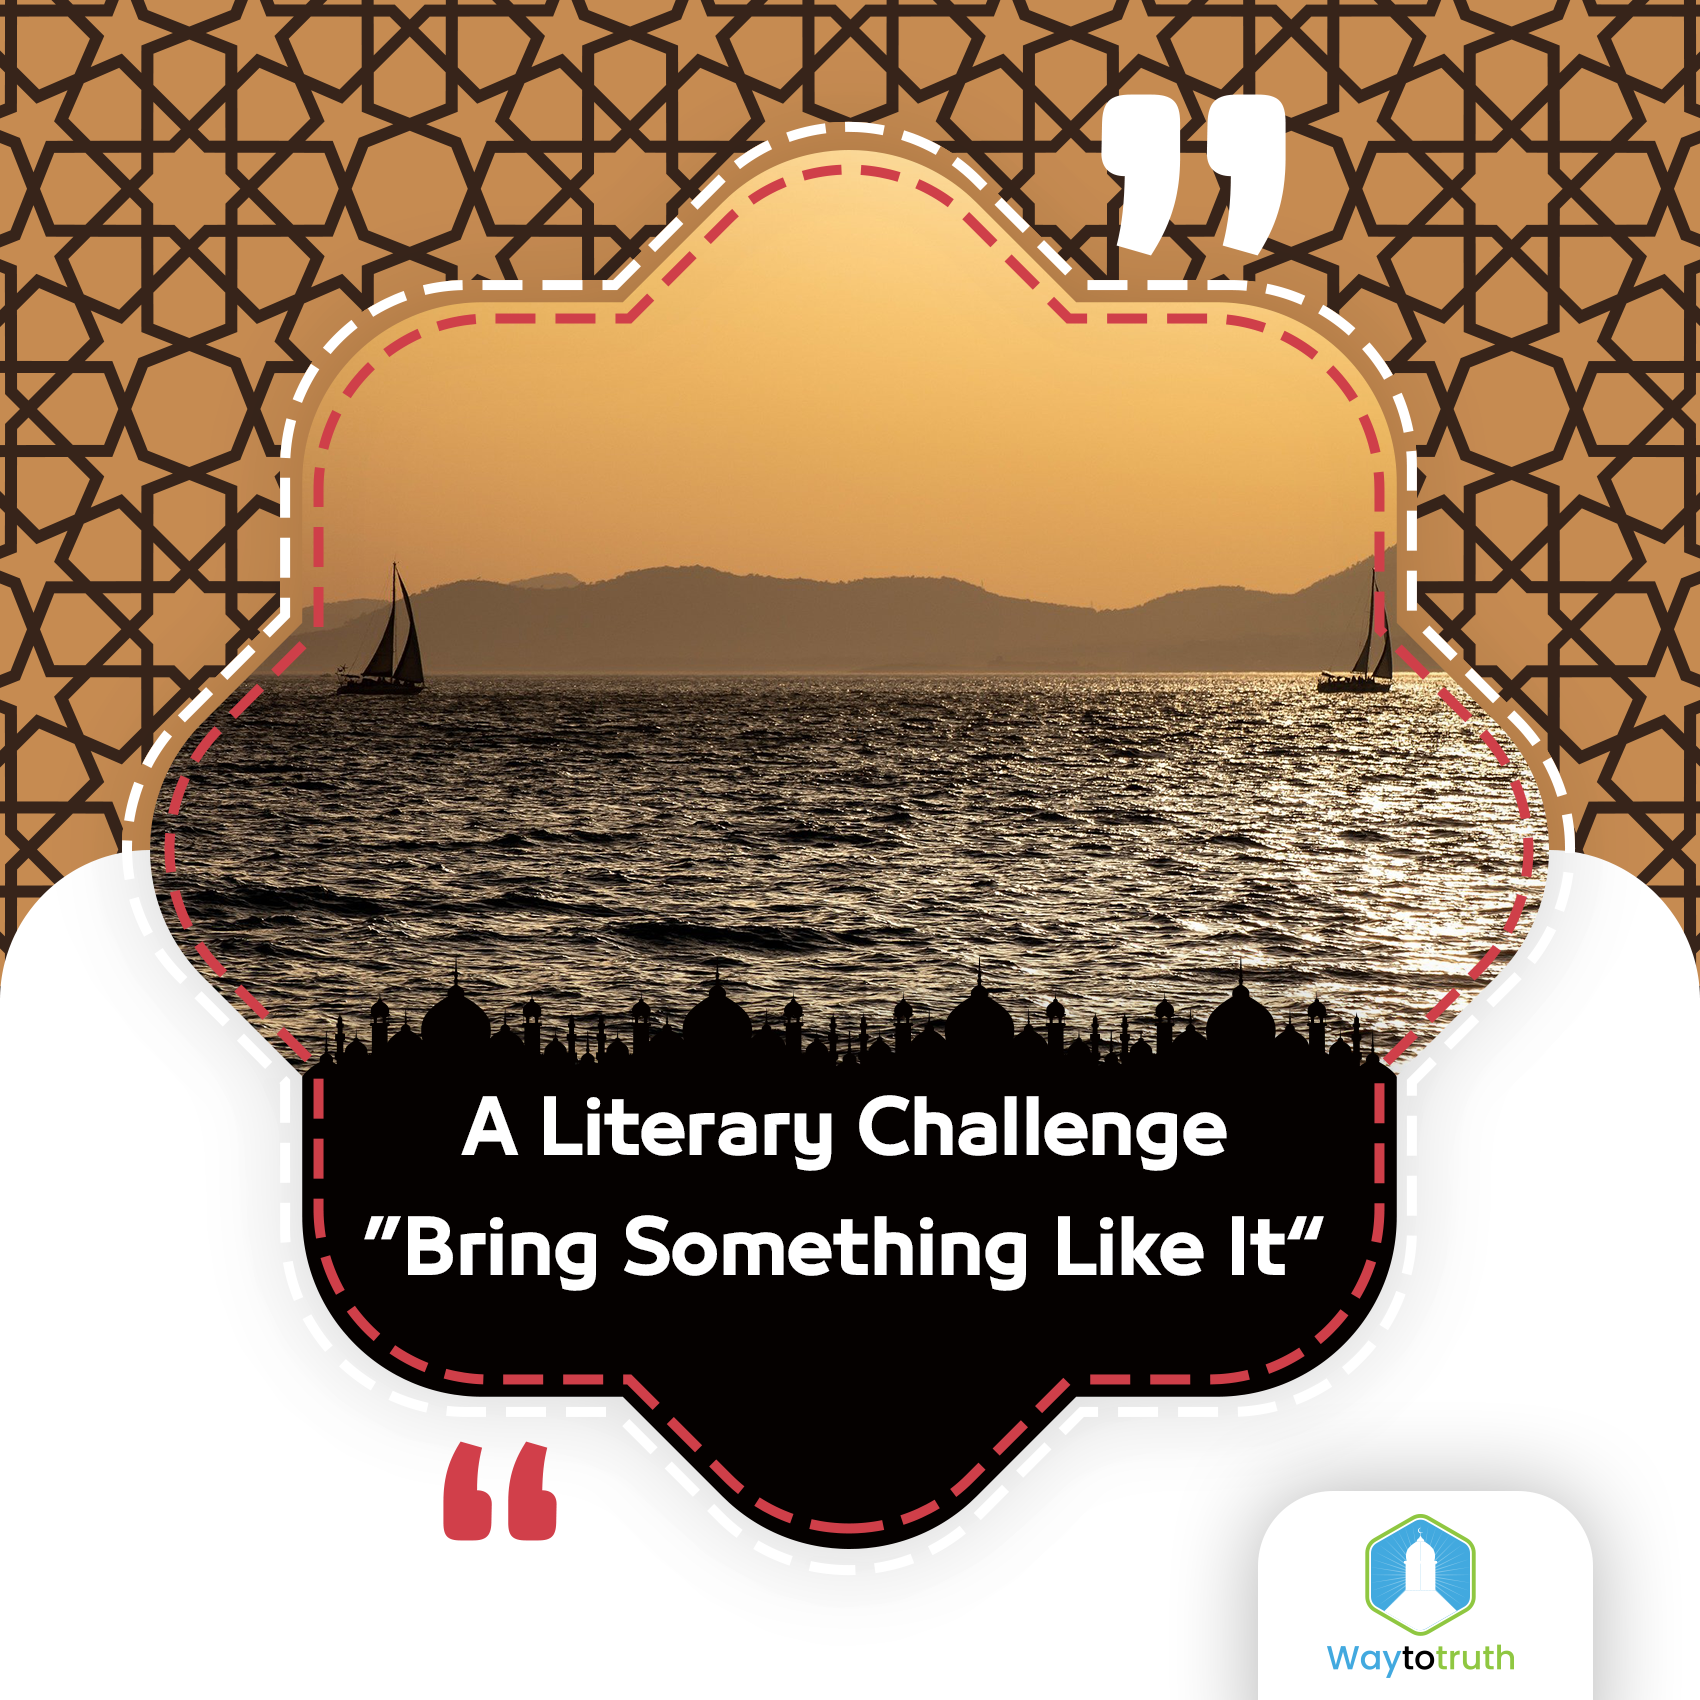 A Literary Challenge: “Bring Something Like It”